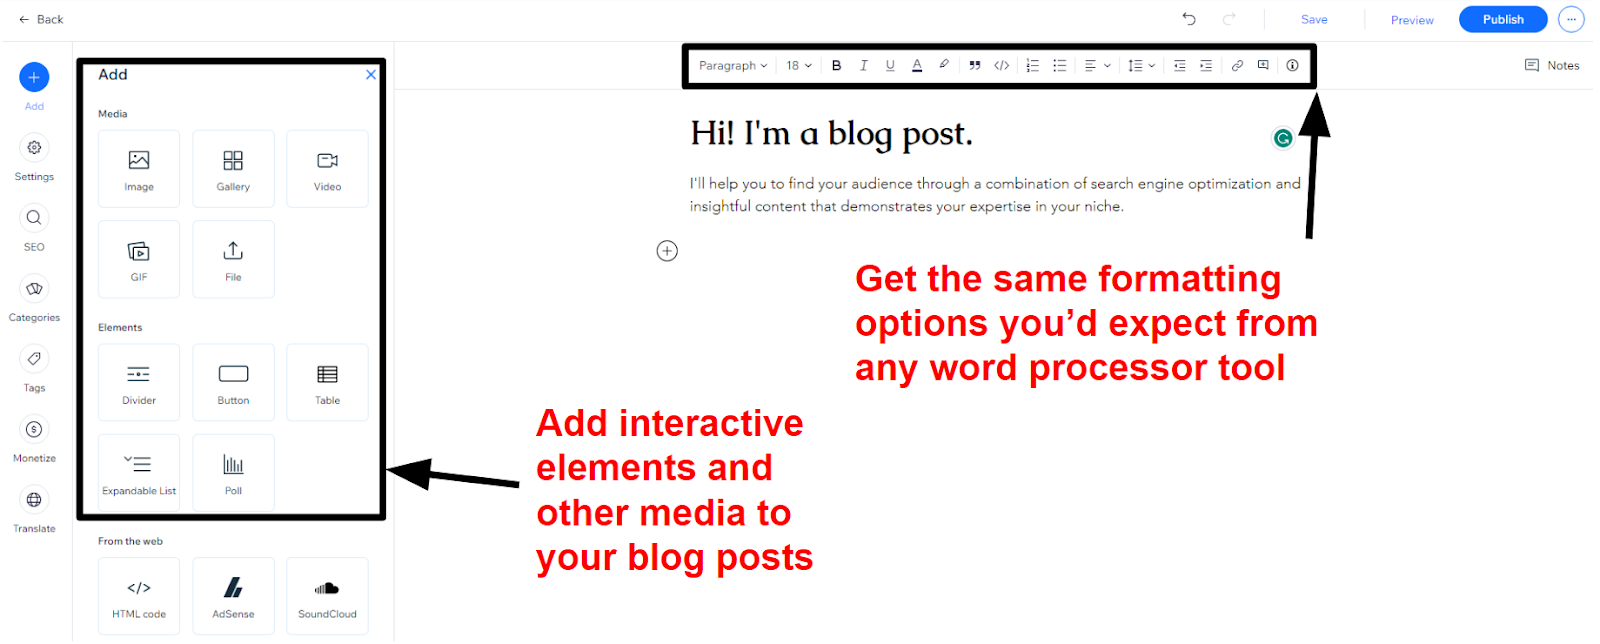 A screenshot of Wix's blog editor showing formatting and additional element options